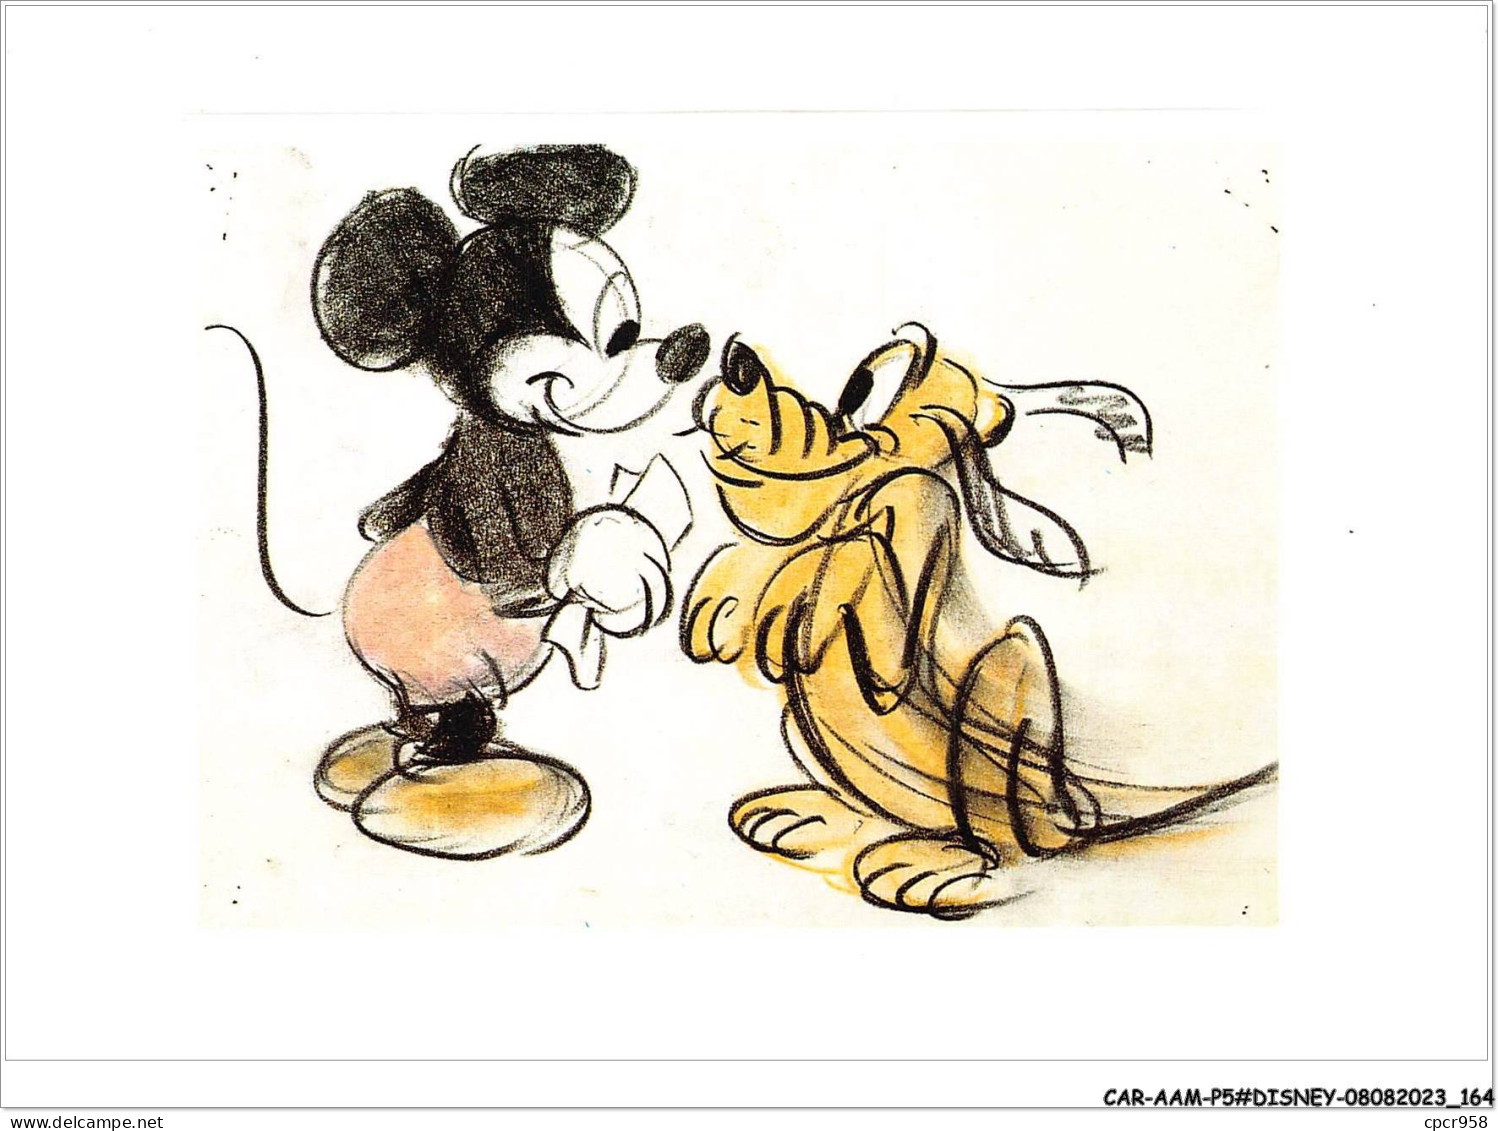 CAR-AAMP5-DISNEY-0490 - Mickey - Original Story Sketch Of Mickey Mouse And Pluto - Pluto's Purchase - Disneyland